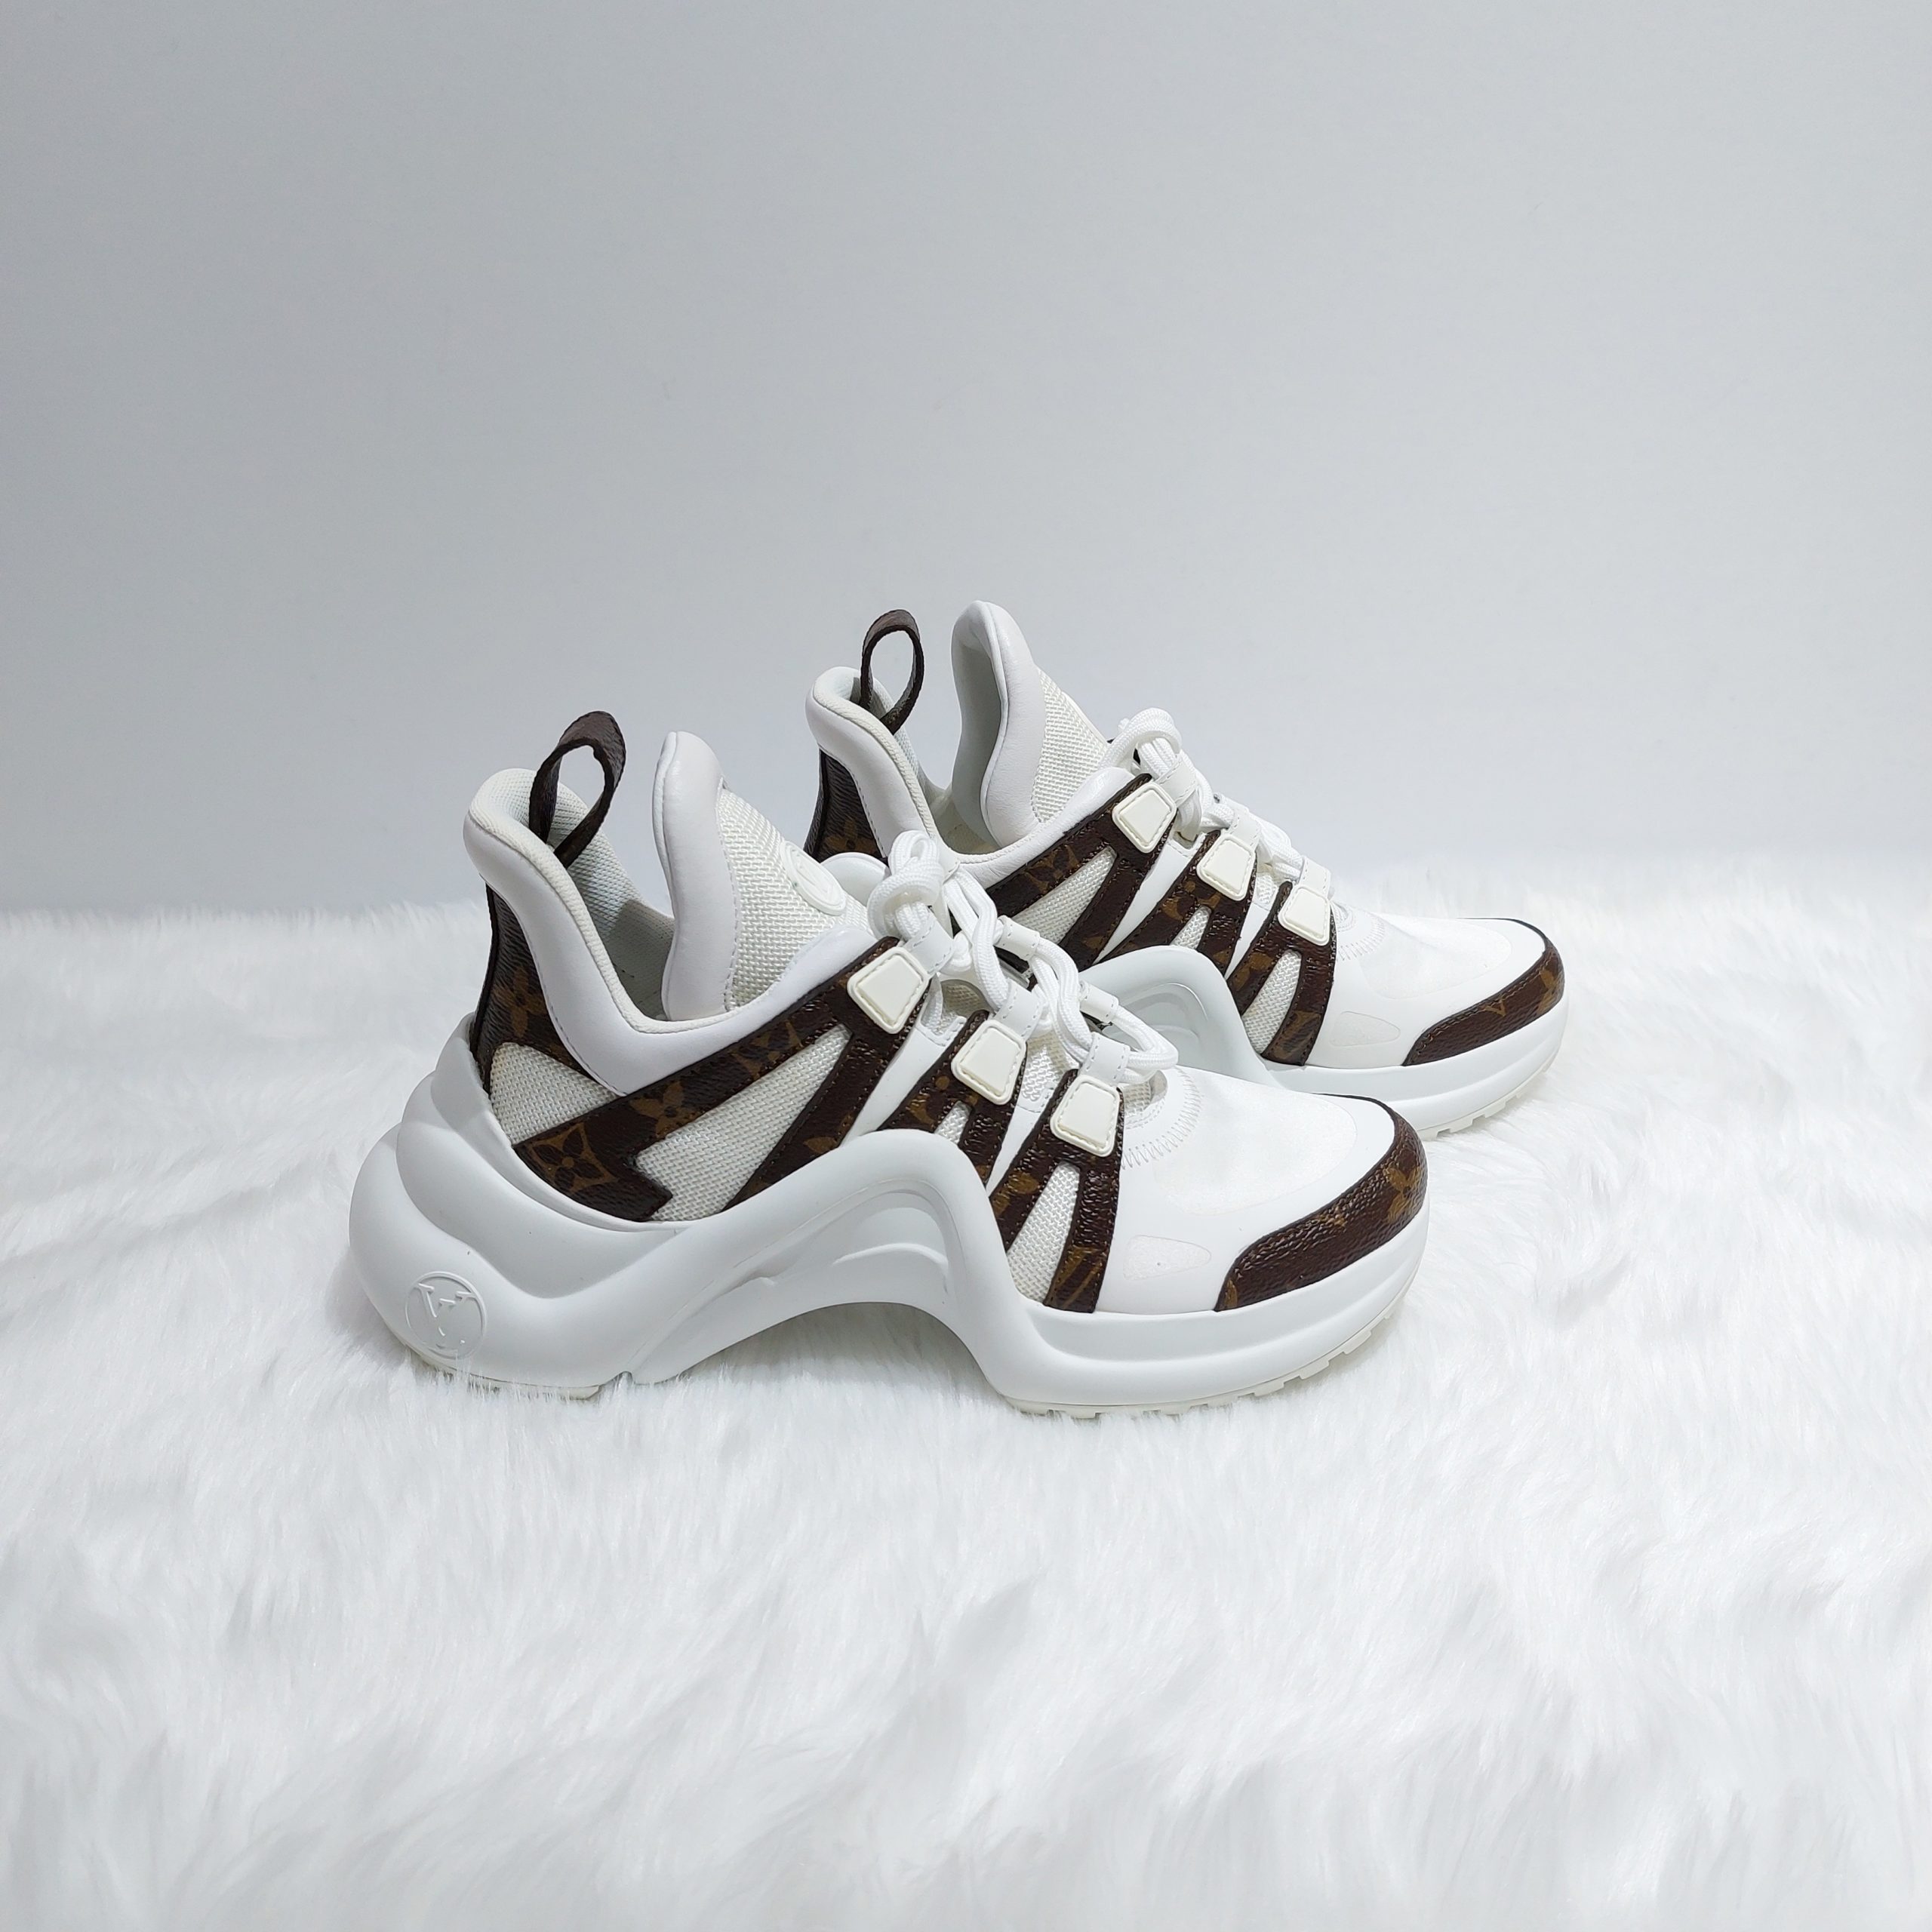 Louis Vuitton Off-White/Brown Mesh and Monogram Coated Canvas Archlight  Low-Top Sneakers Size 36.5